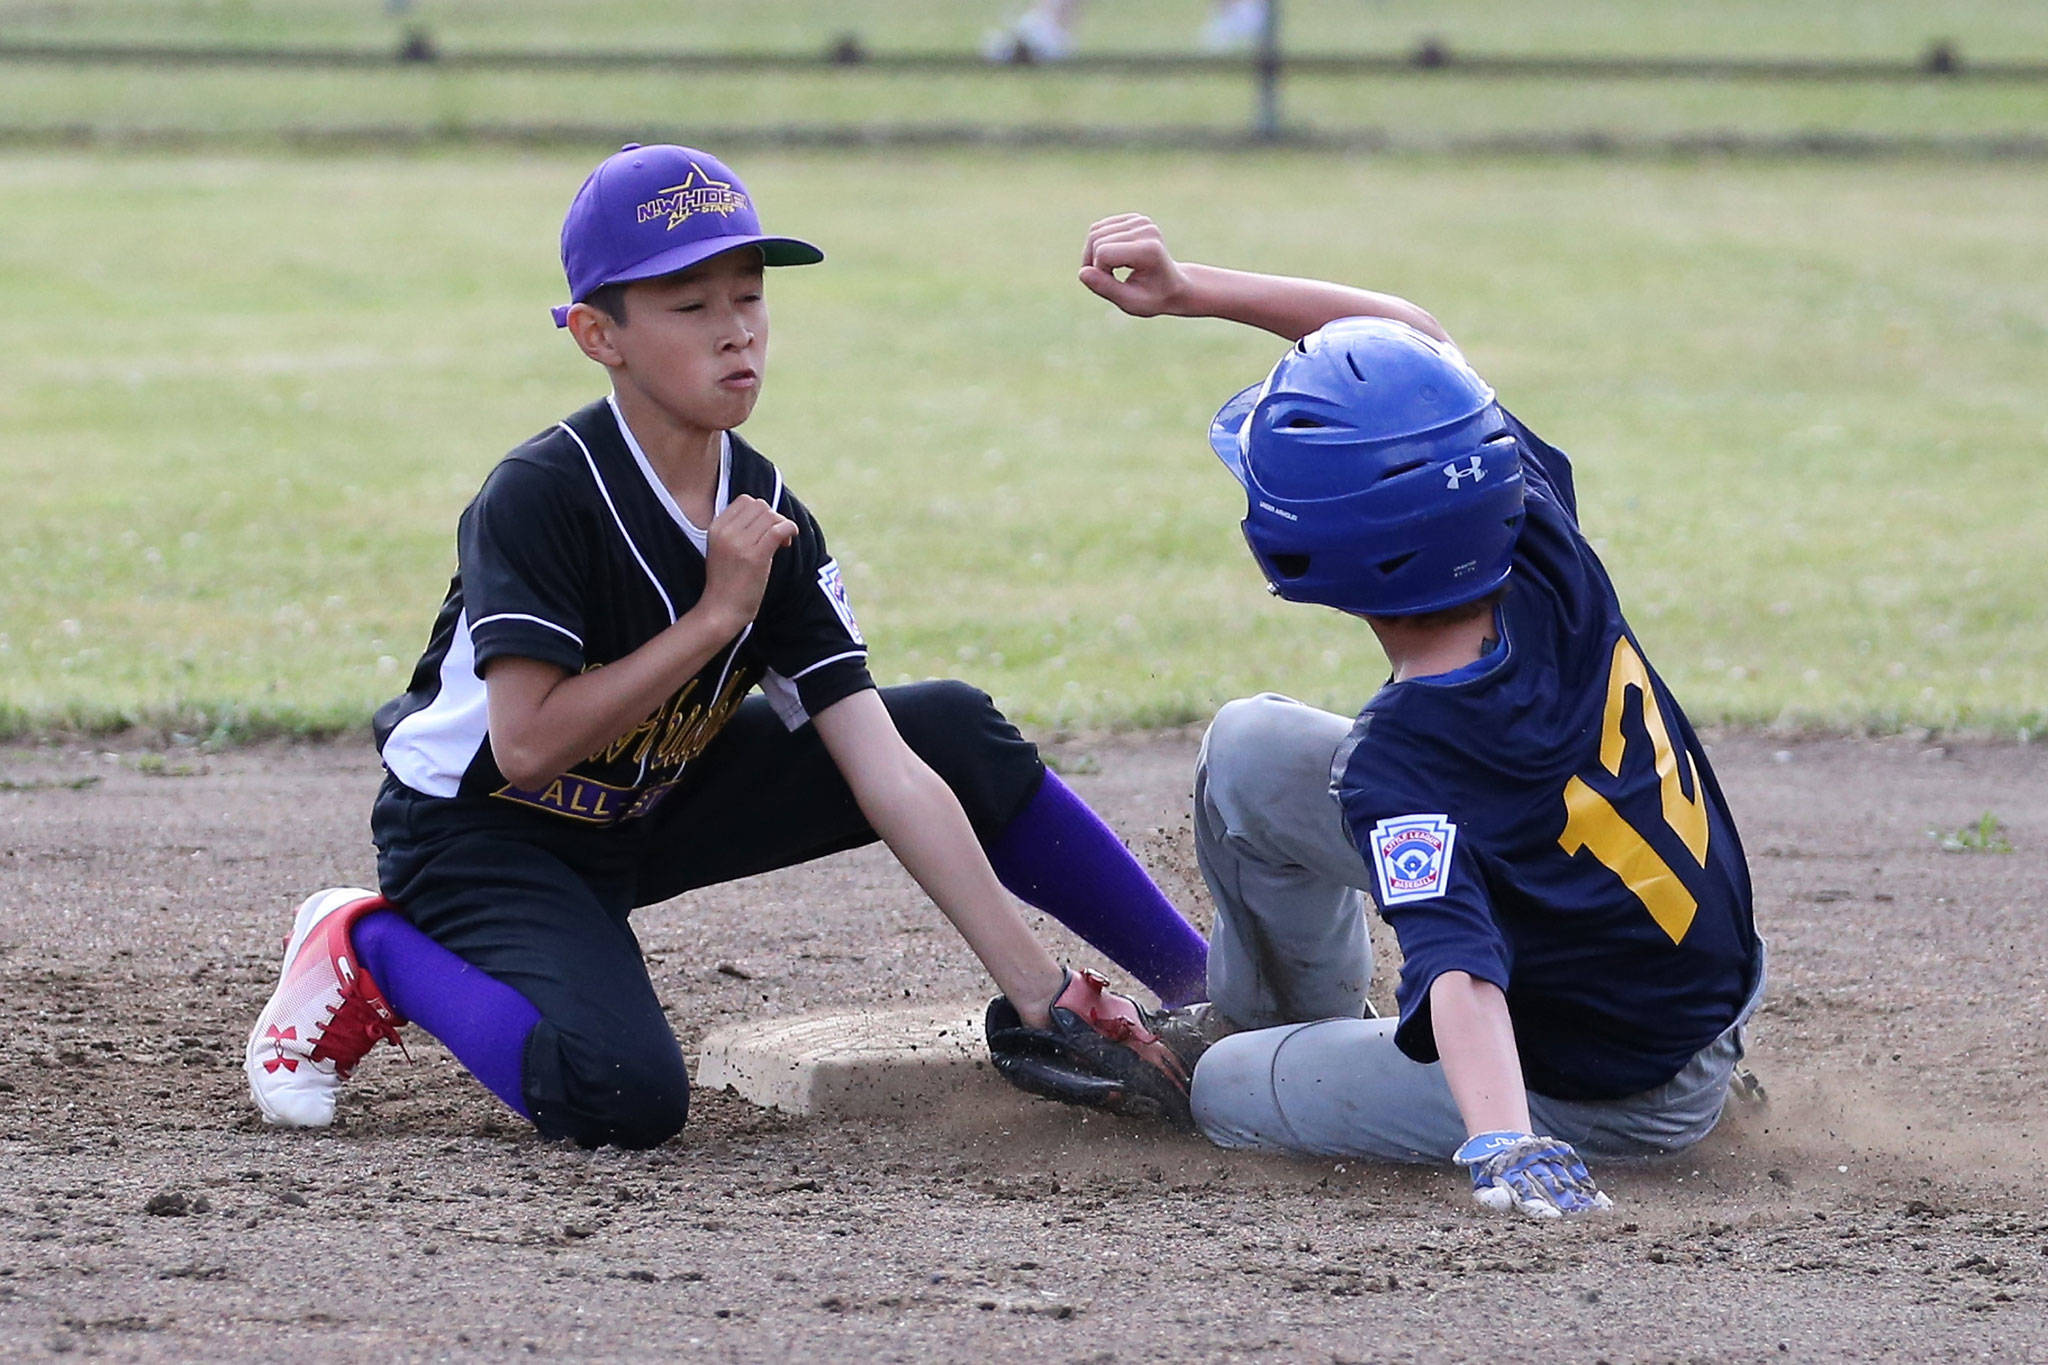 North Whidbey shortstop Holden Jesus puts the tag on a Burlington-Edison runner in Monday’s game.(Photo by John Fisken)